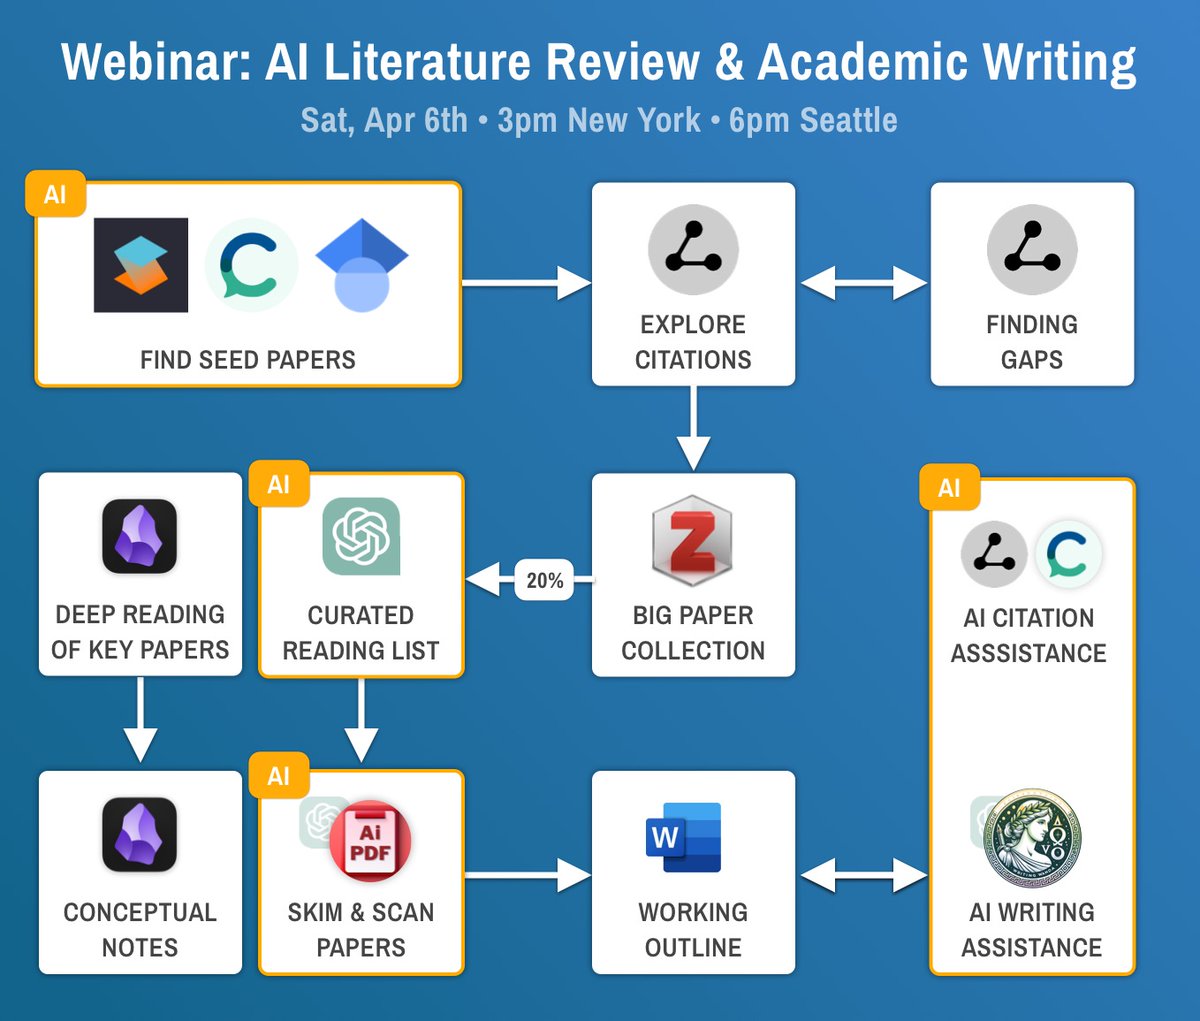 Webinar Apr 6th:
Literature Review & Academic Writing with AI

→ Find the most impactful literature quickly
→ Uncover reference gaps
→ Aid your writing process  faithfully & ethically with AI

Link: effortlessacademic.com/elr3-webinar/

All details below:
👇